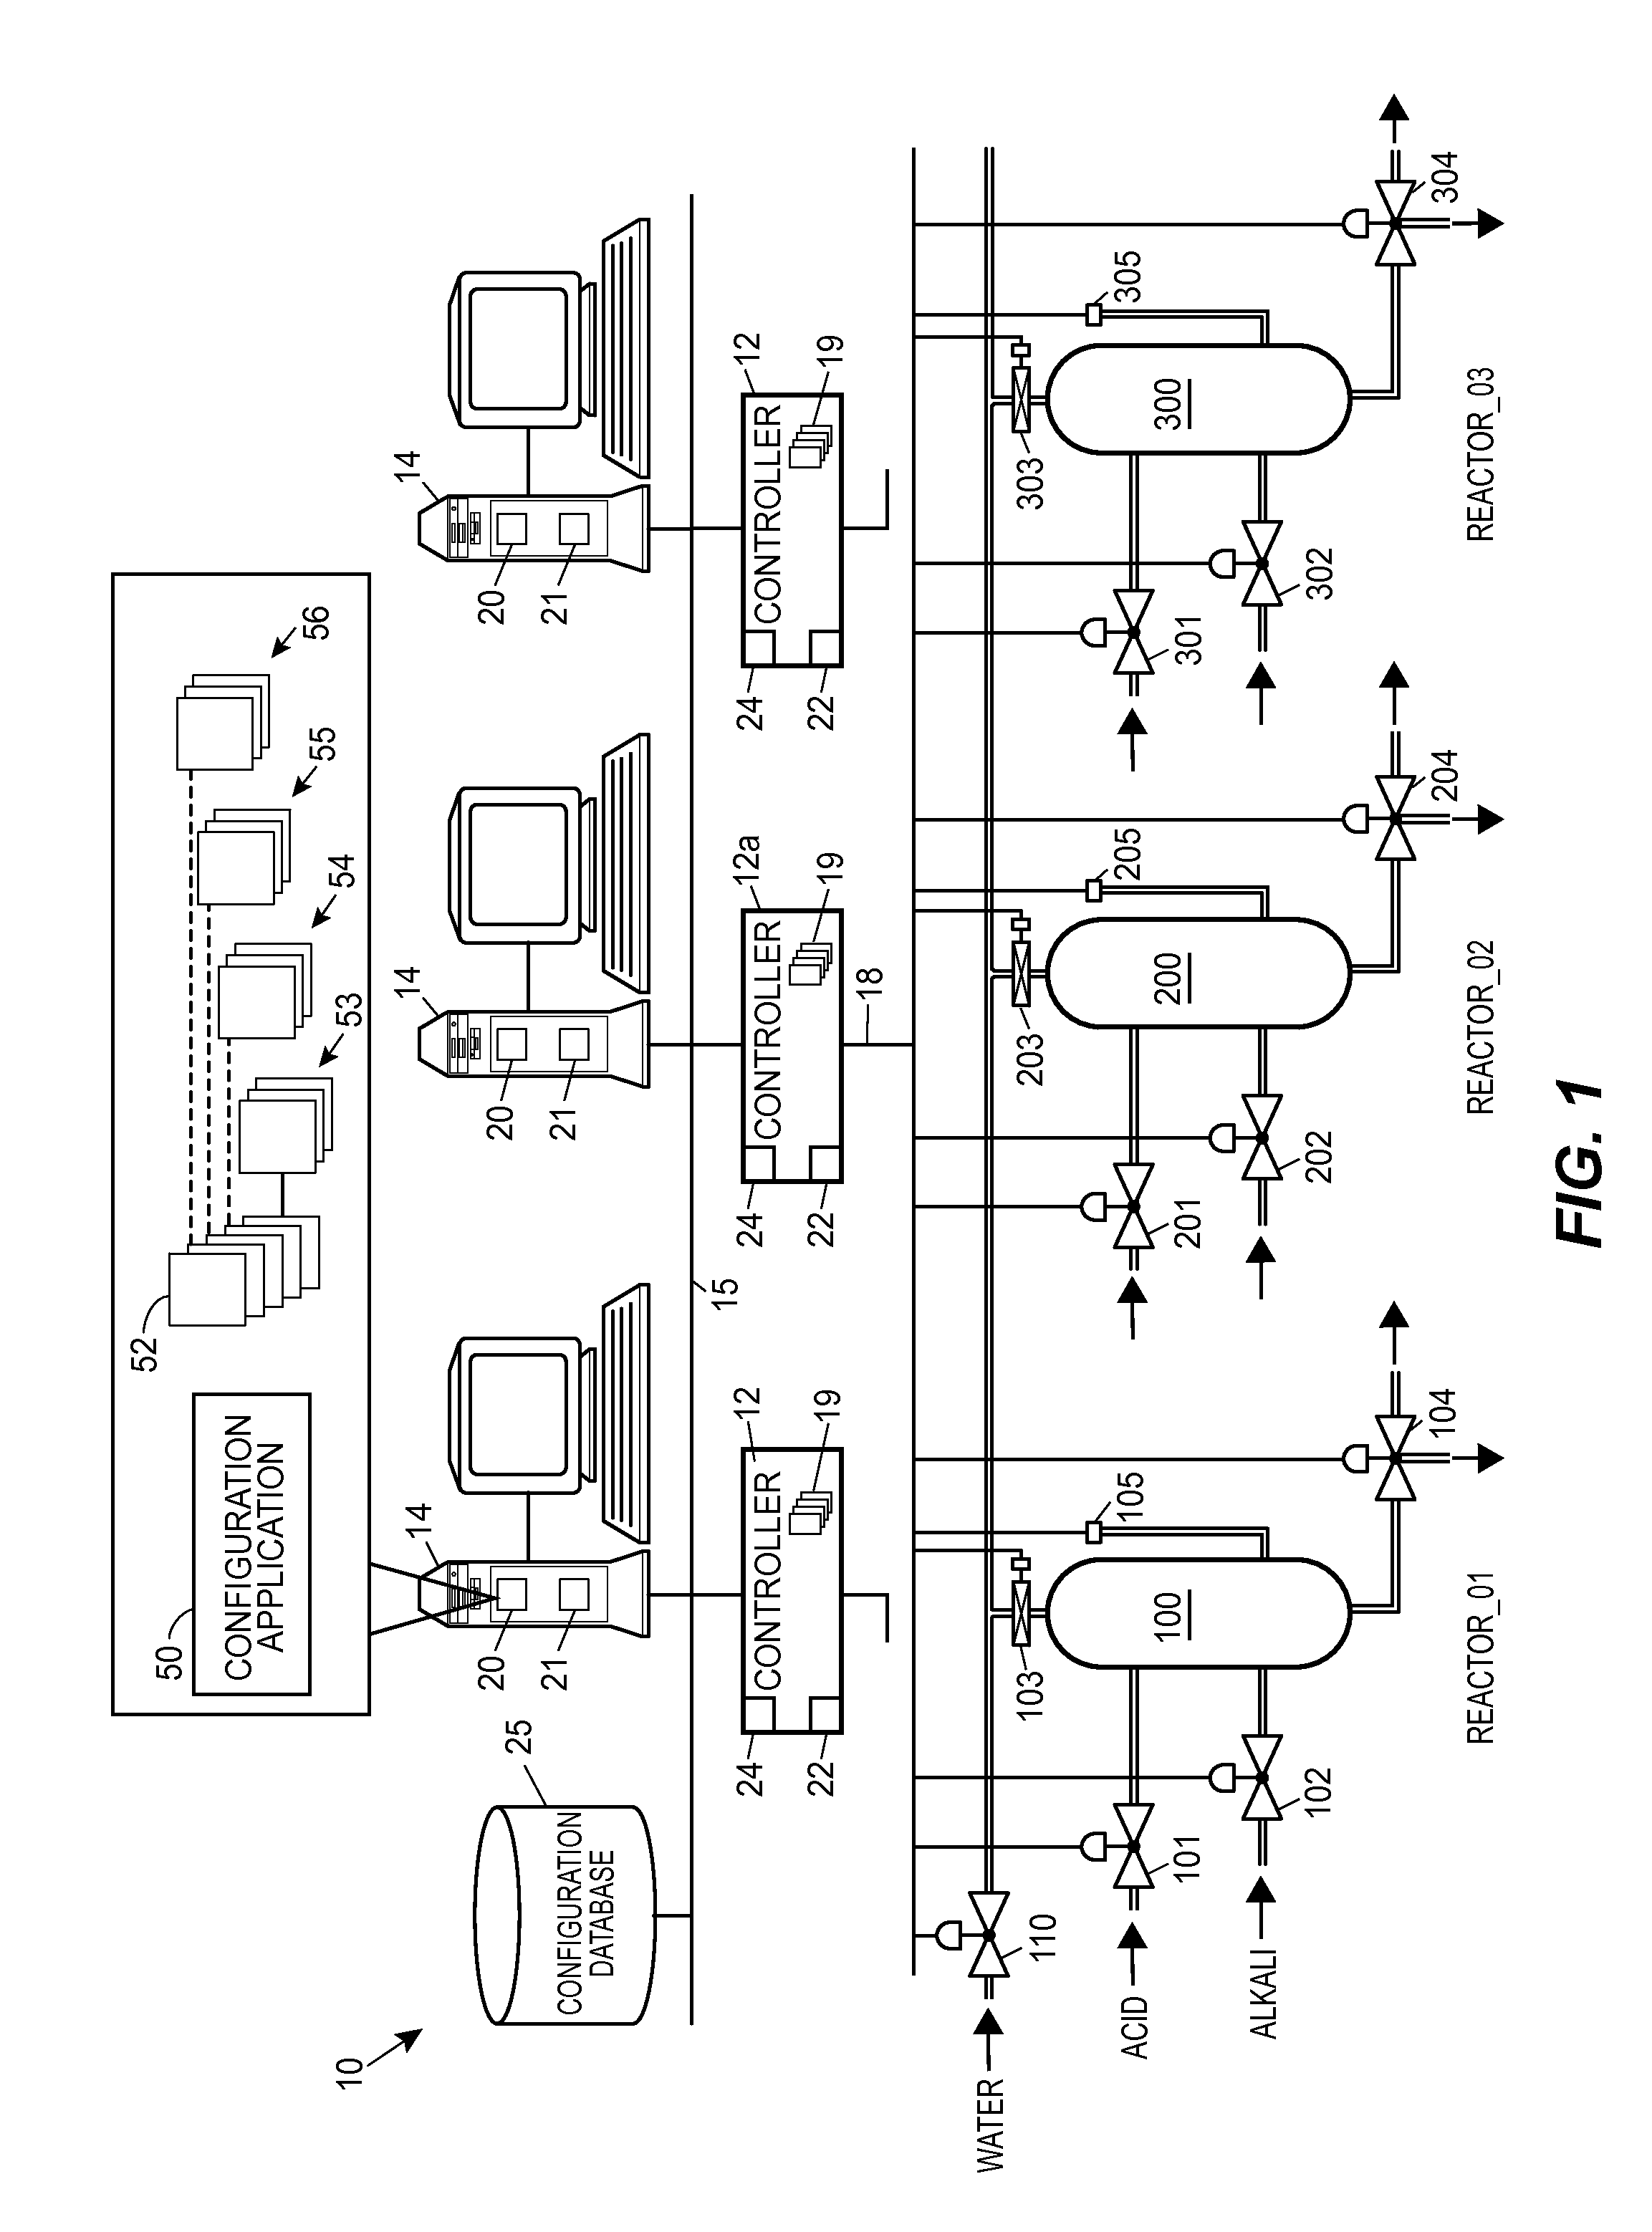 Method and apparatus for managing process control configuration